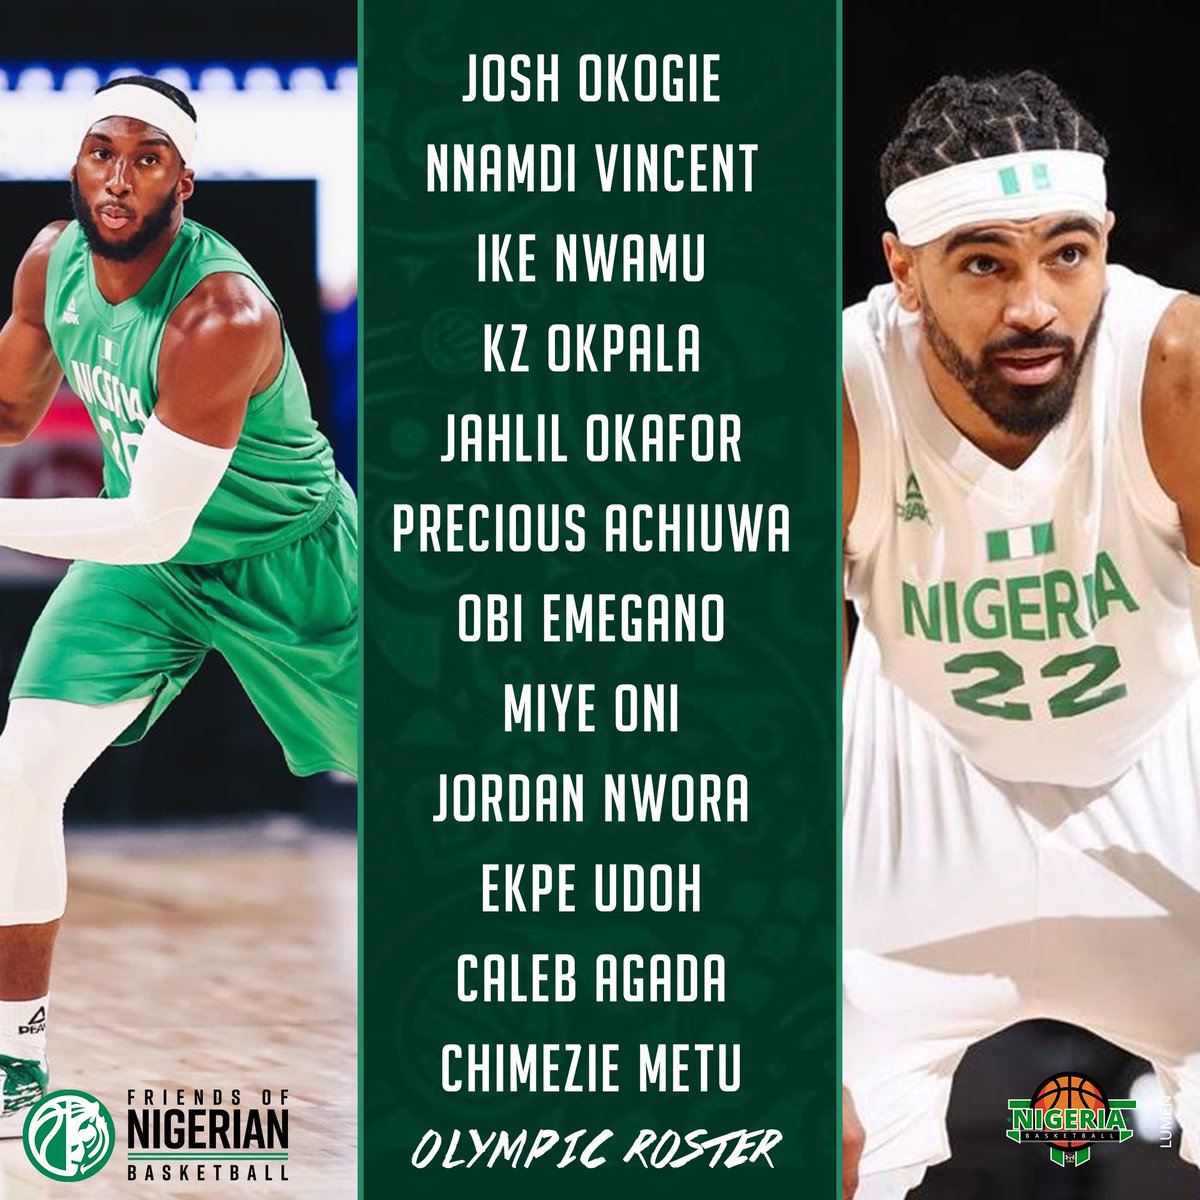 RT @NigeriaBasket: Your 12-man Olympic roster. #Tokyo2020 https://t.co/nUv3MFMEr7